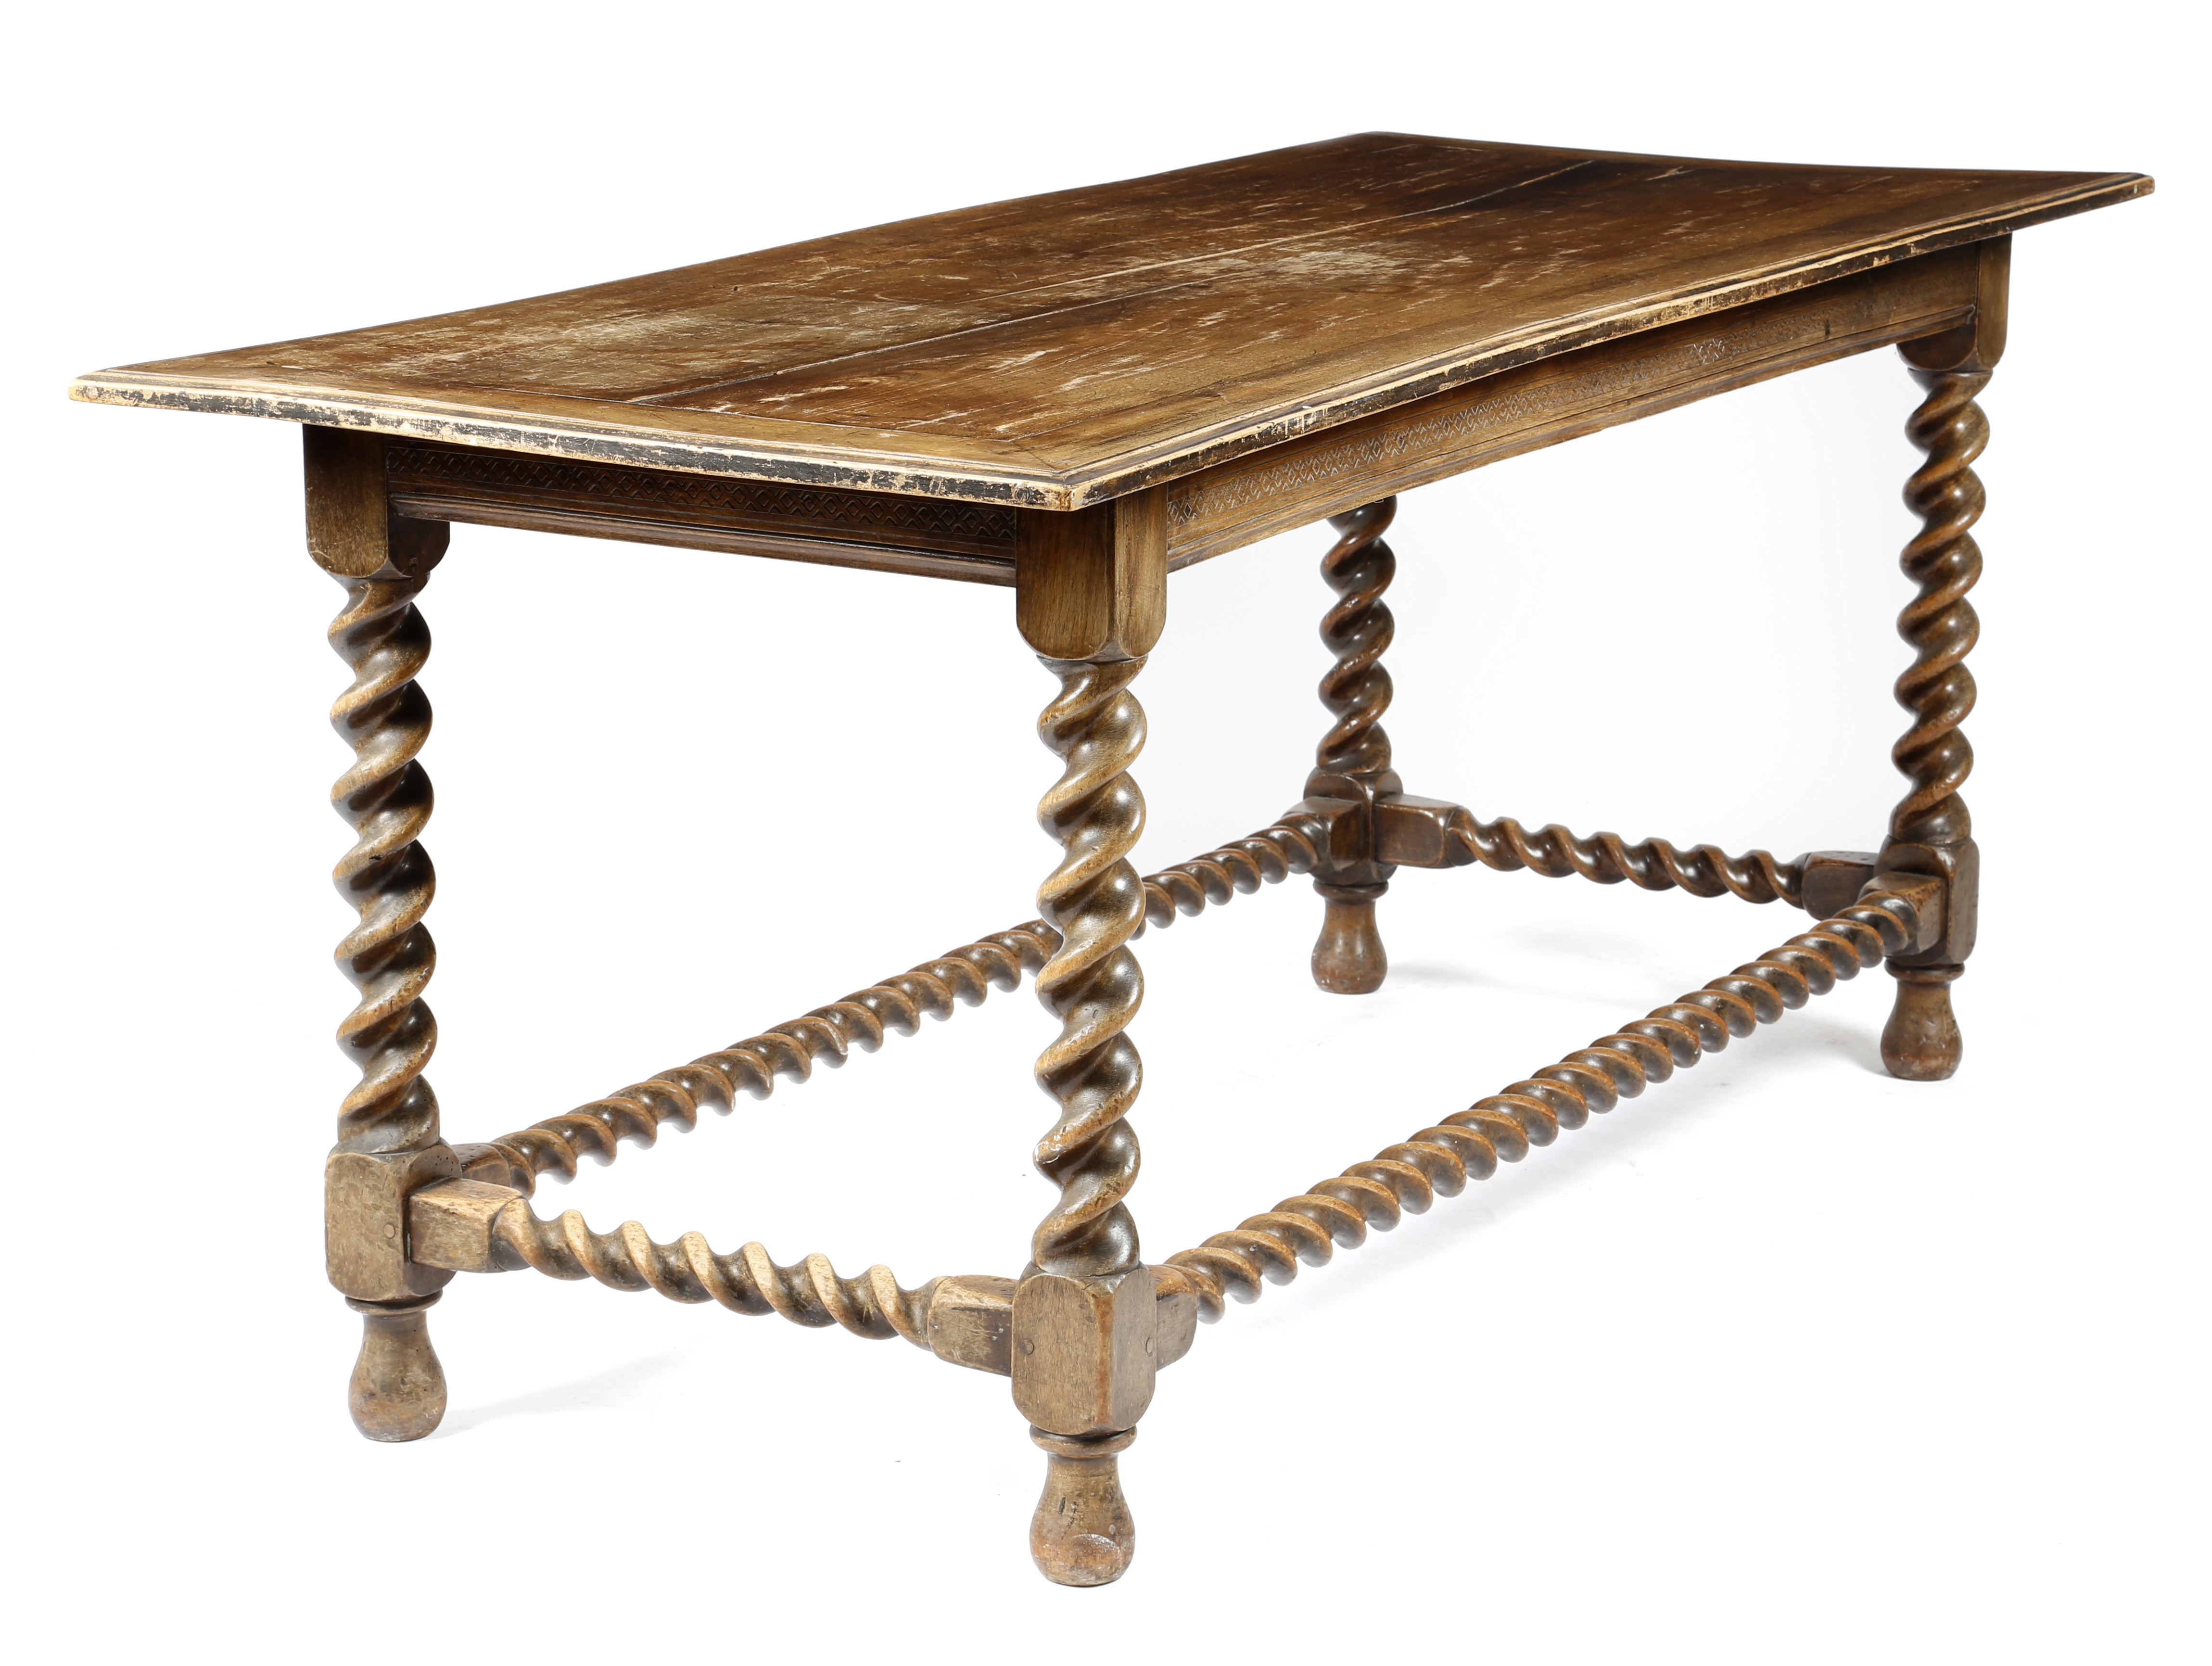 A CONTINENTAL WALNUT CENTRE TABLE IN 17TH CENTURY STYLE LATE 19TH / EARLY 20TH CENTURY the